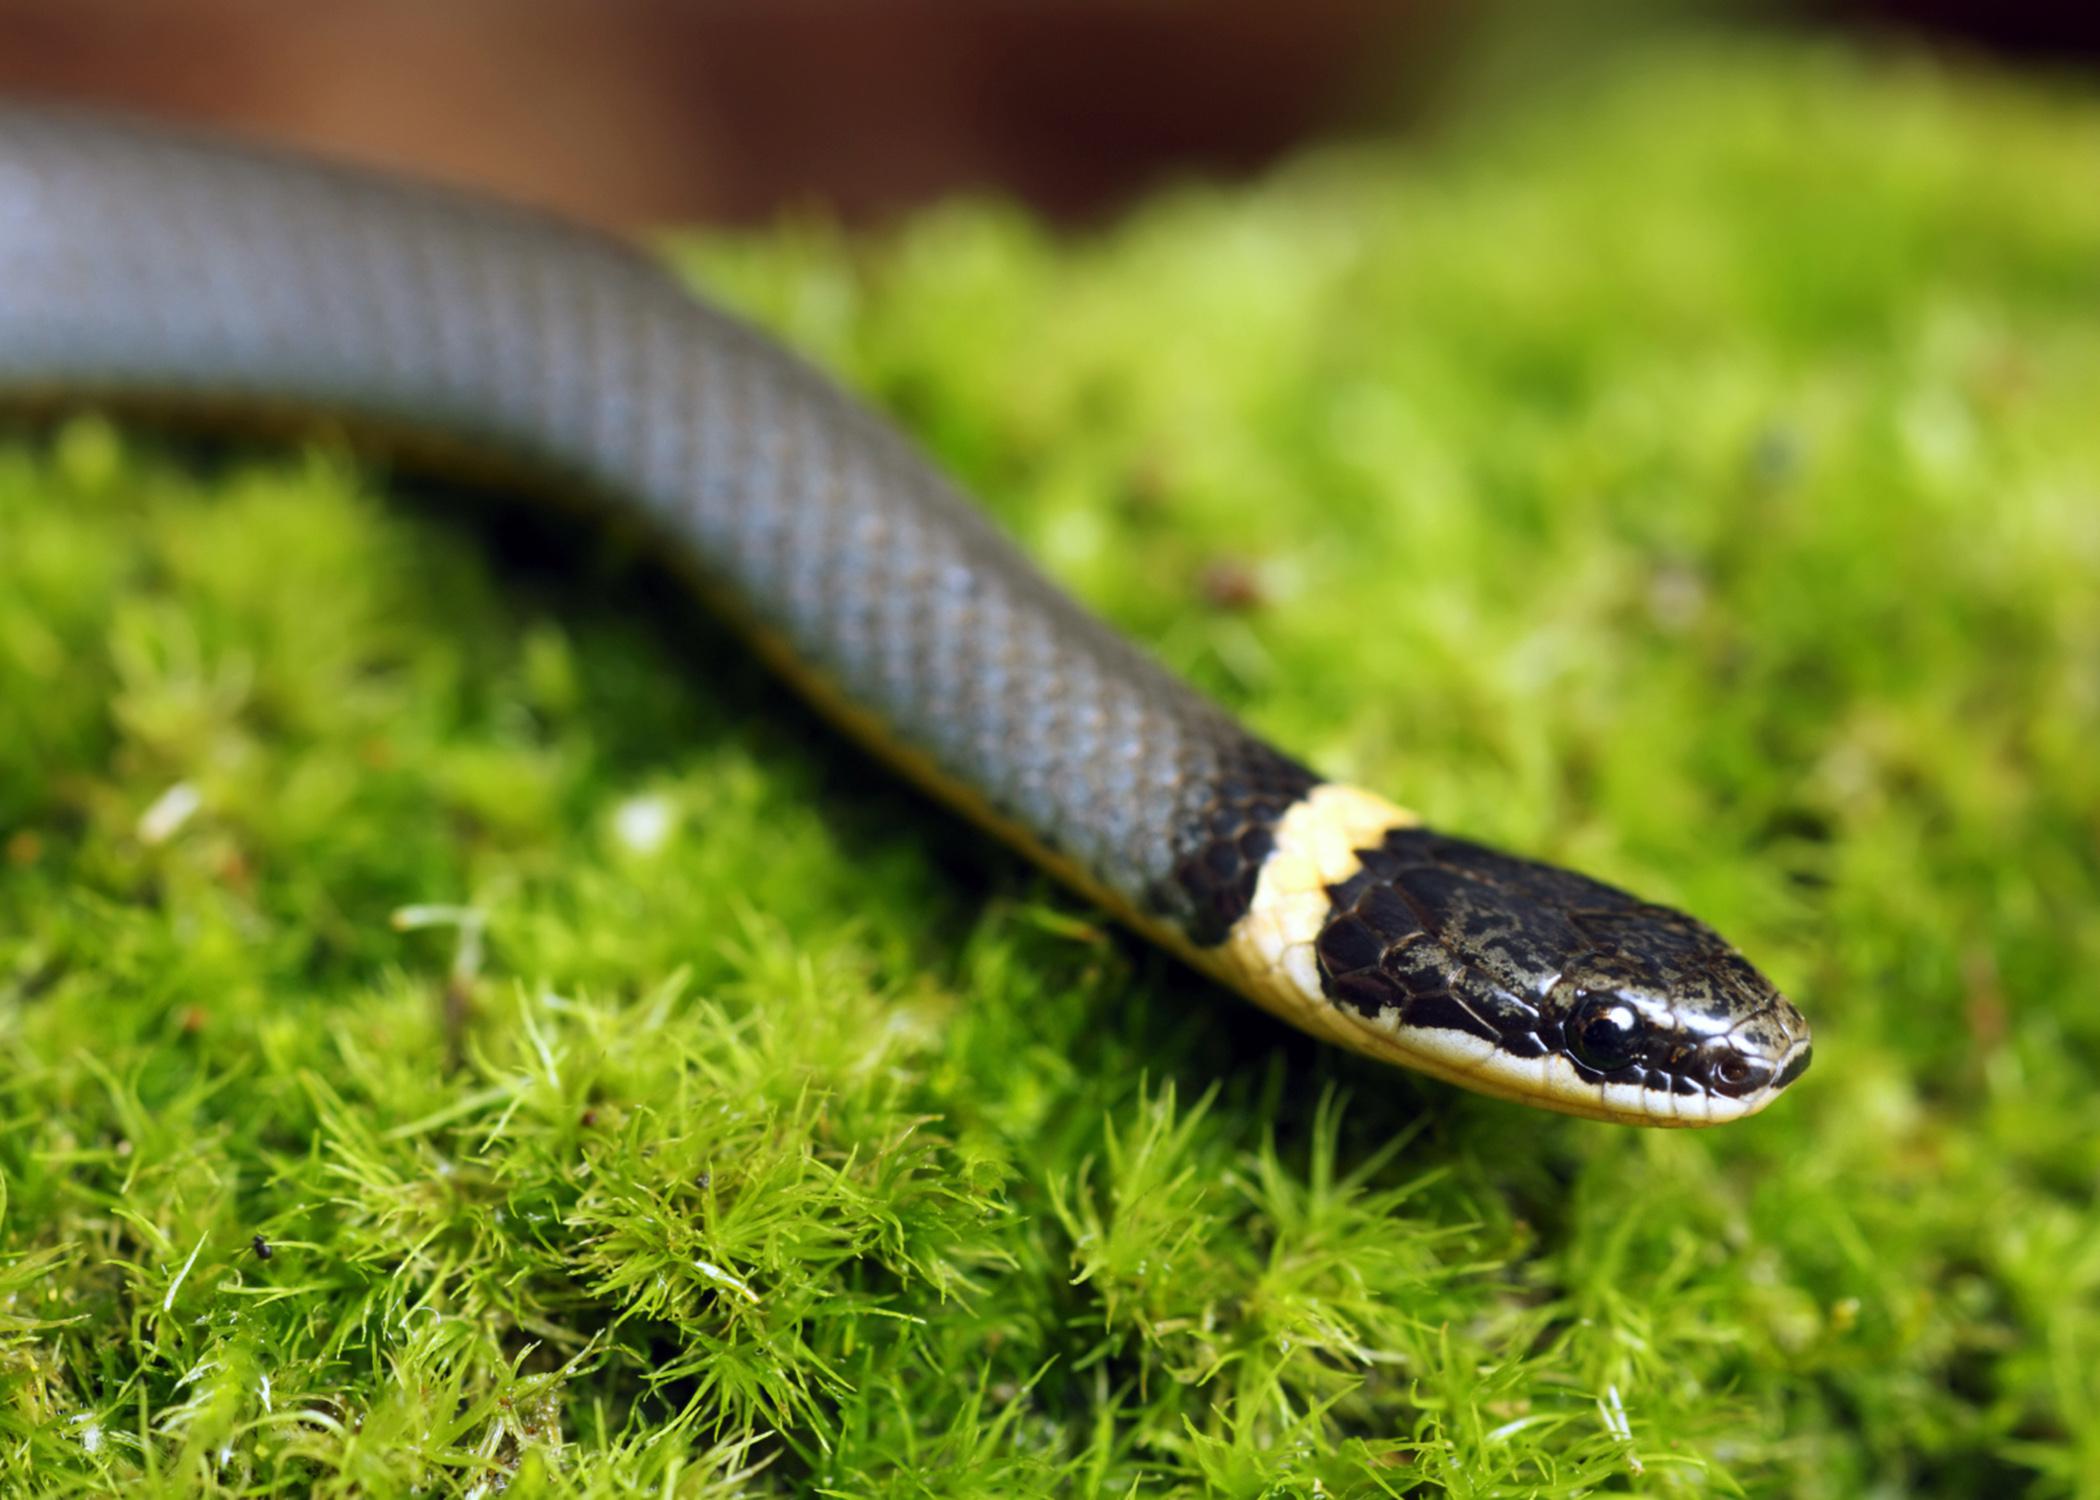 Most snakes in Mississippi, such as this ringneck snake, are nonvenomous and help control rodent and other nuisance wildlife populations. (Photo by iStockphoto)